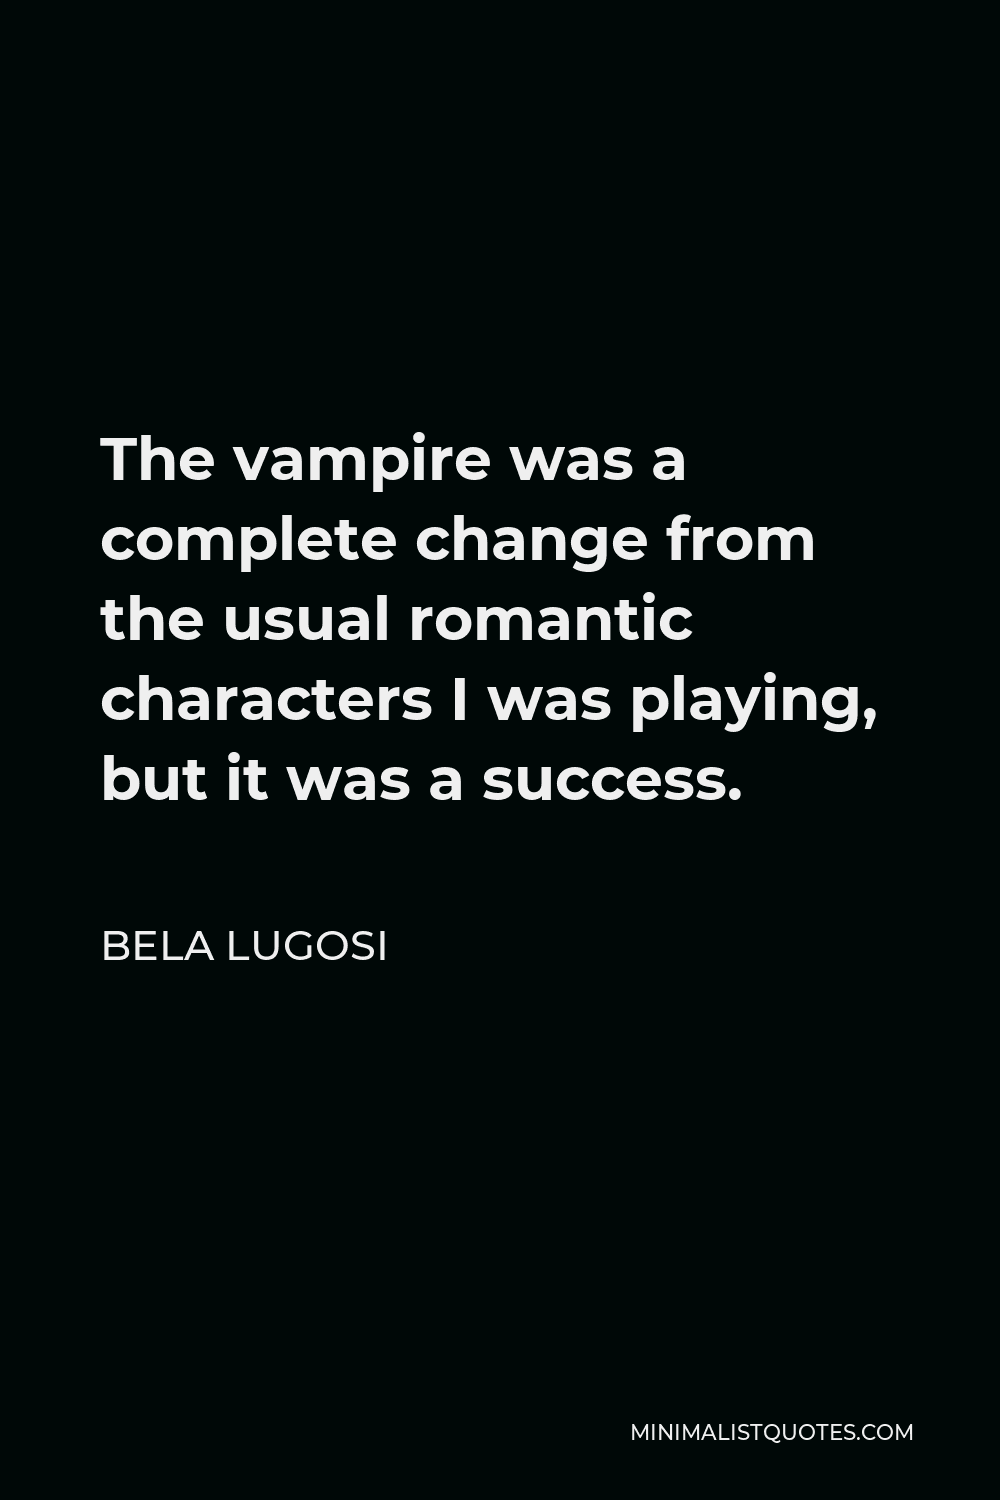 Bela Lugosi Quote - The vampire was a complete change from the usual romantic characters I was playing, but it was a success.